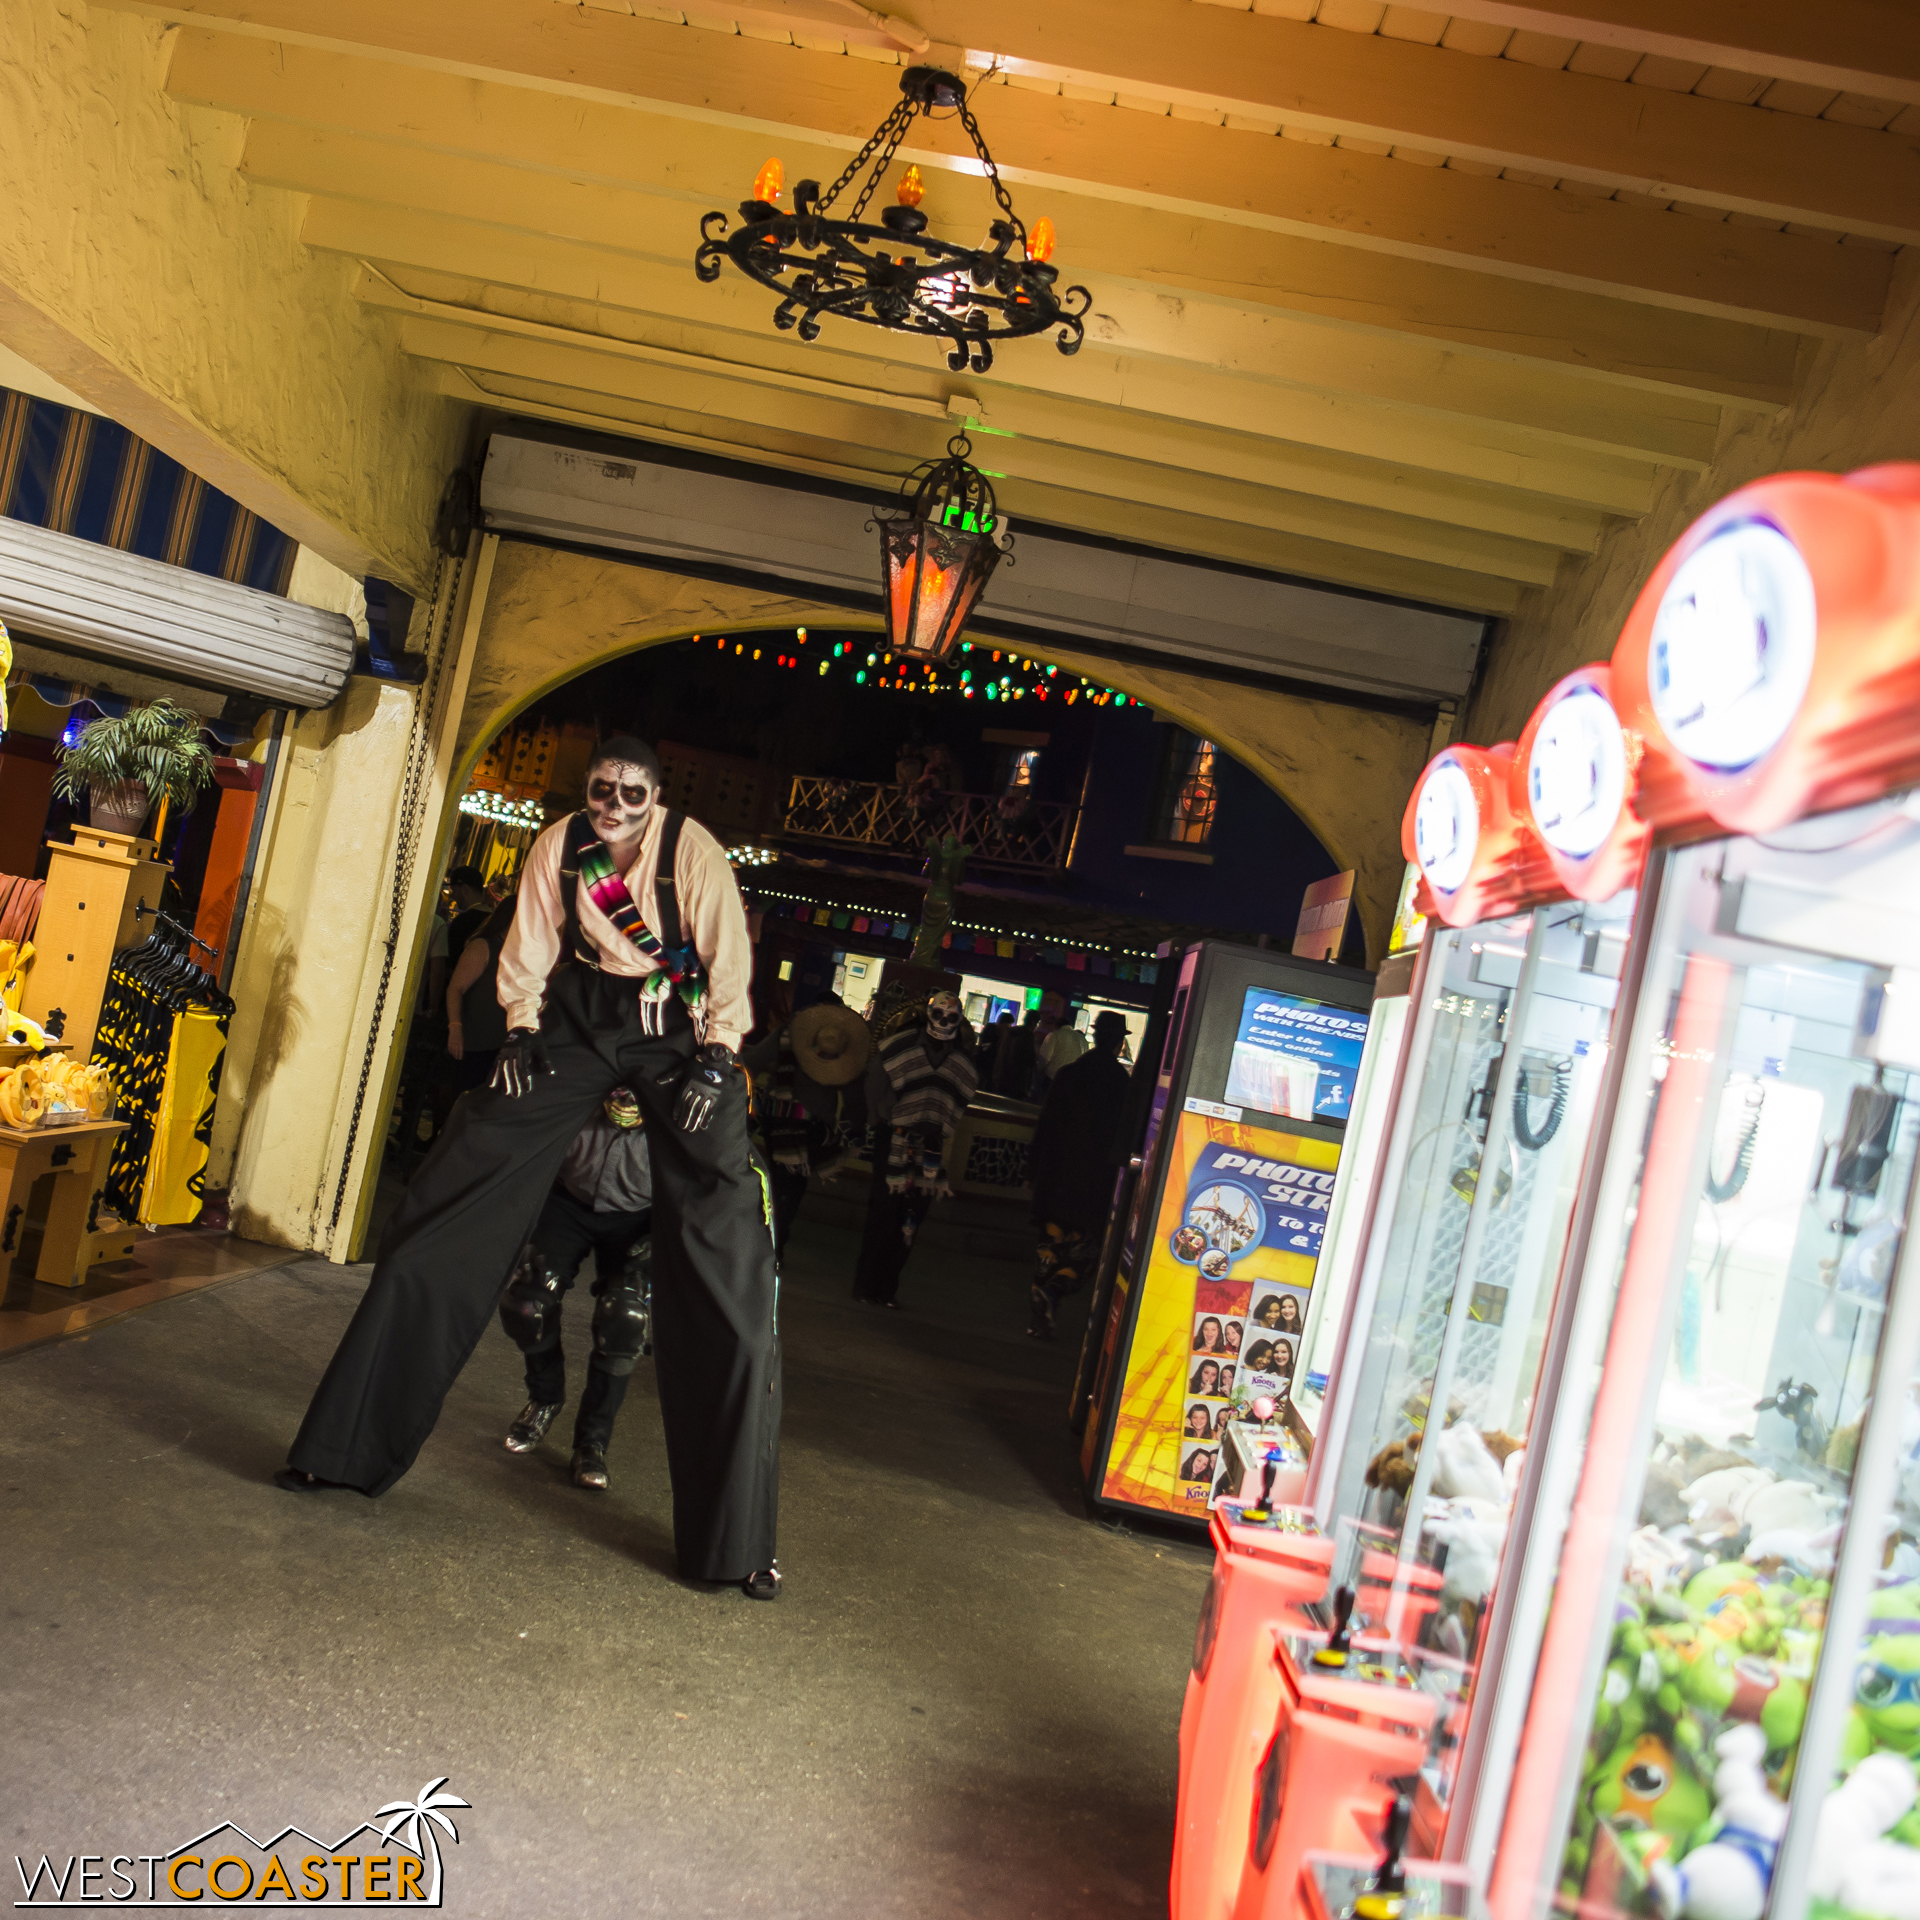  Photog tip: the easiest area to get photos of monsters is in the arcade. 